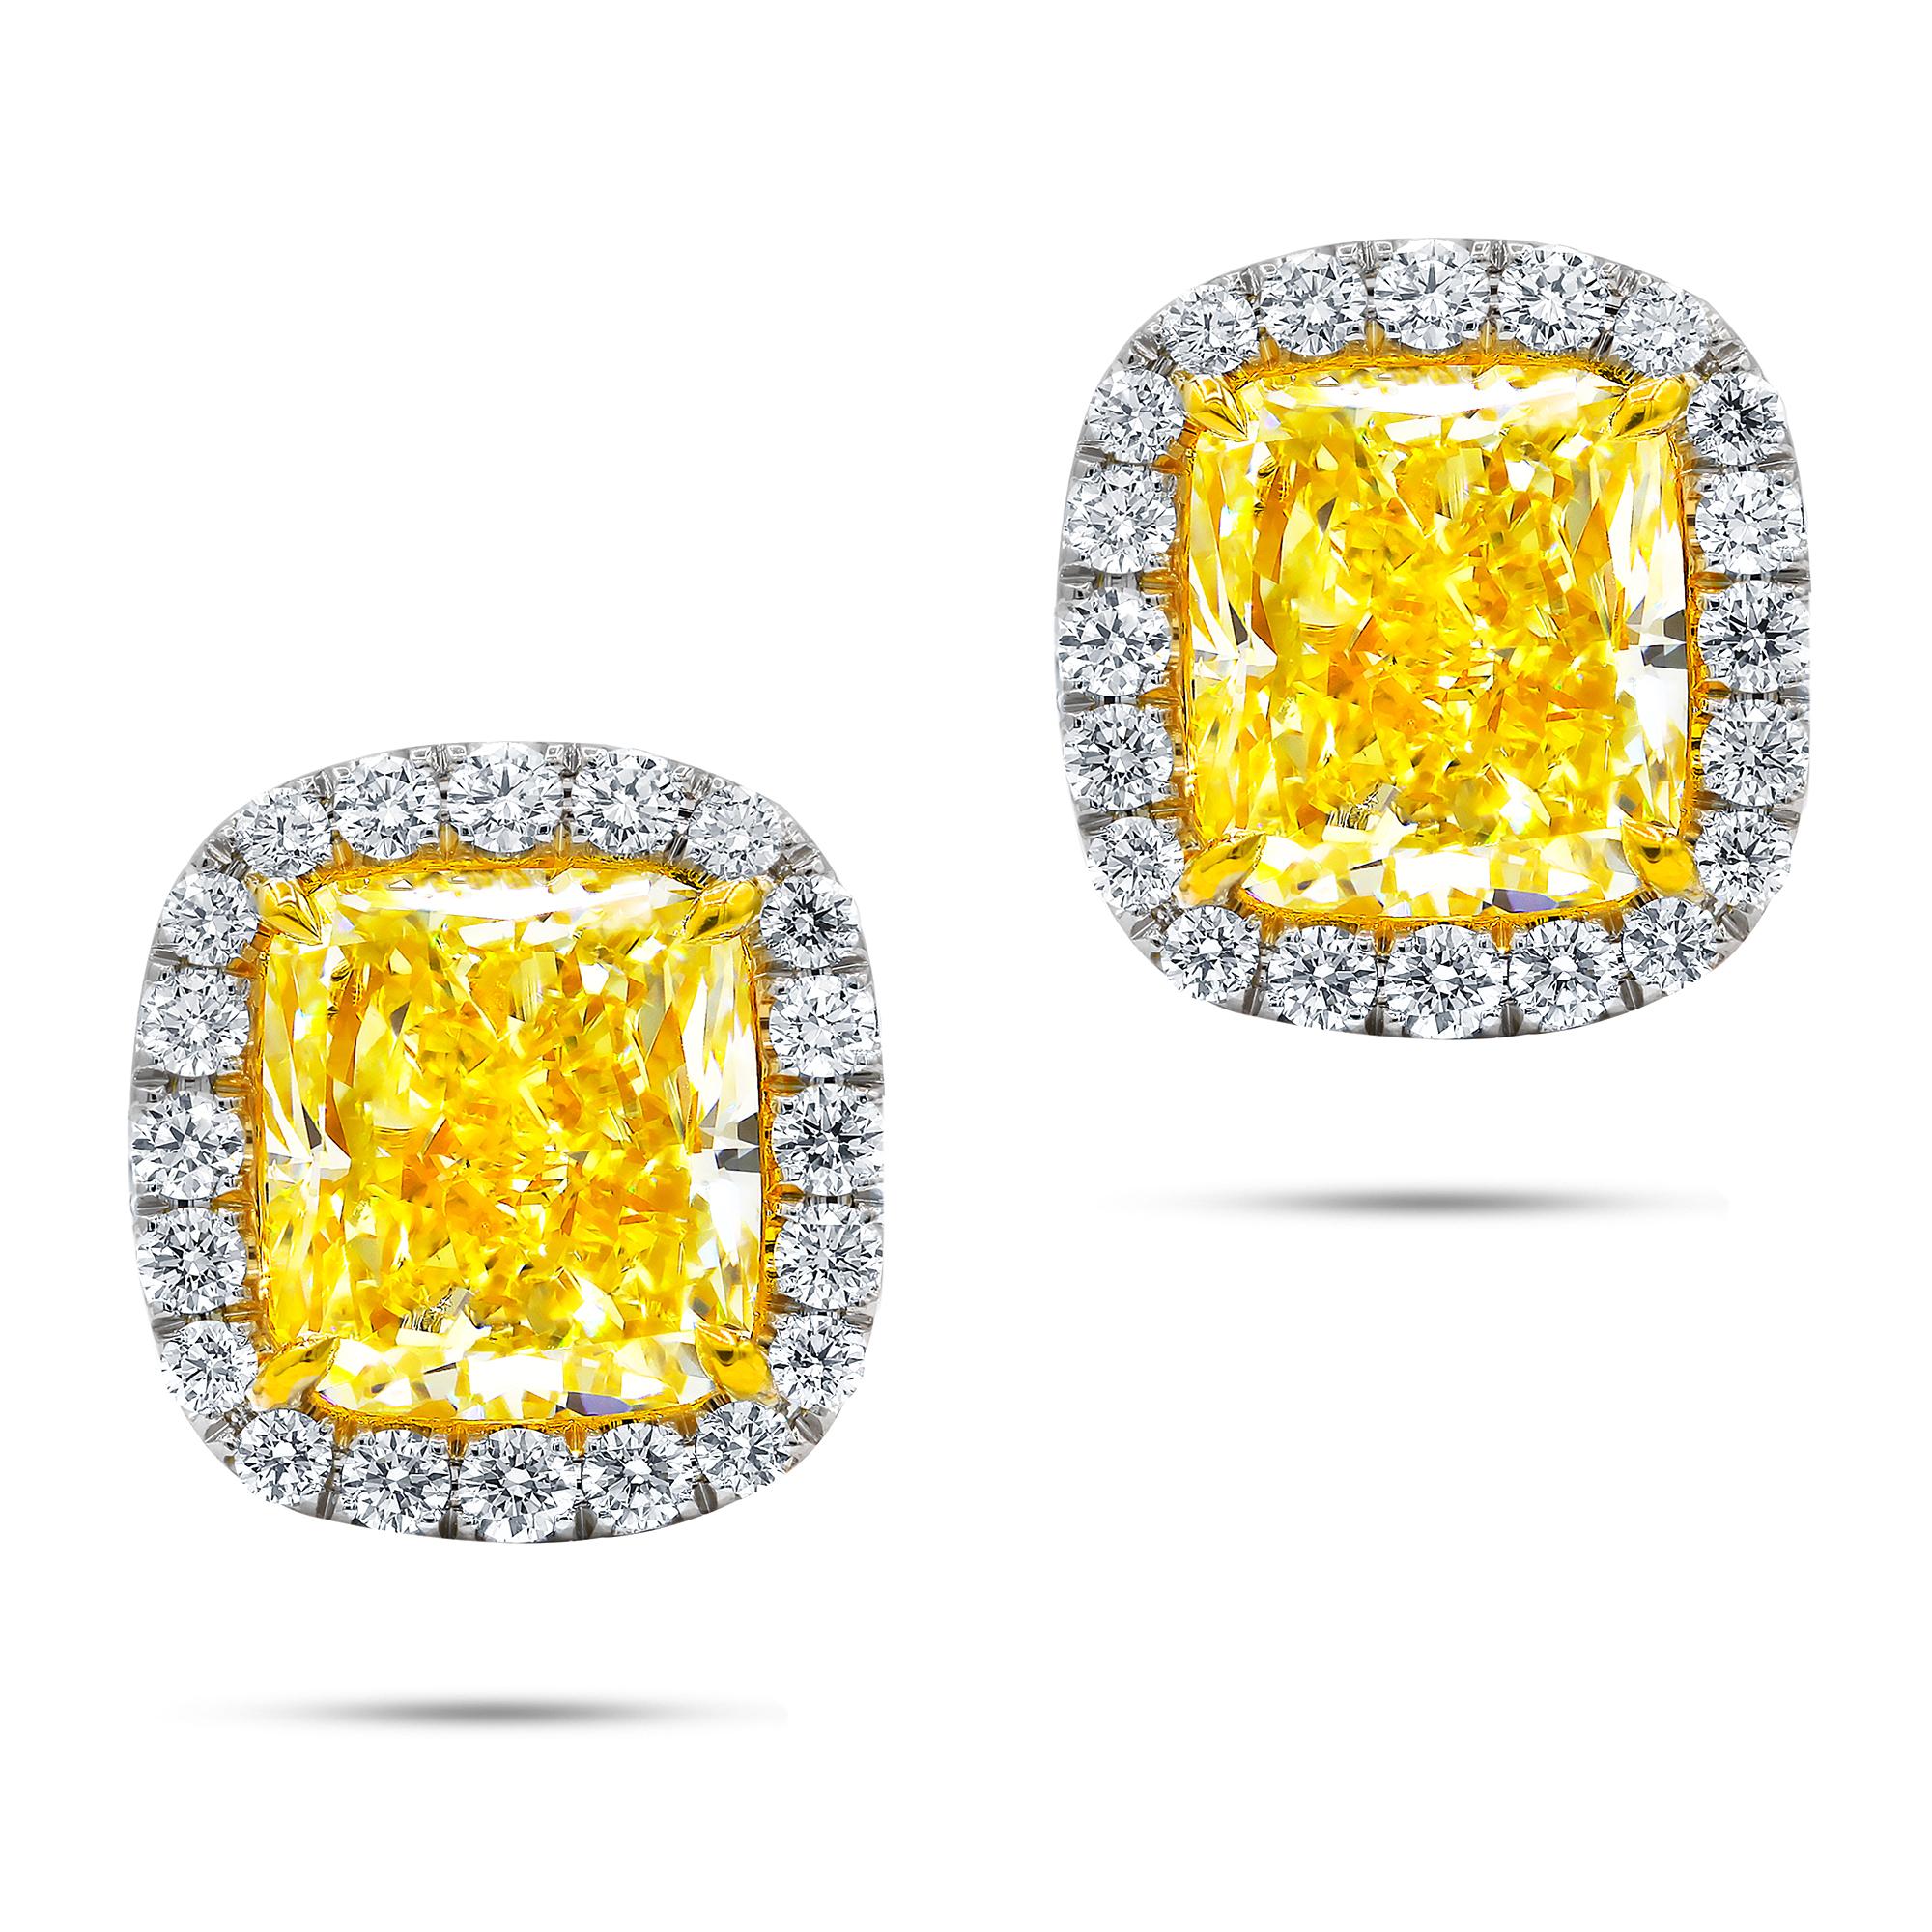 18 Karat Two Tone Stud Earrings Feature Gia Certified Cushion Cuts 1.52cts Fcy/vs1  And 1.51cts Fcy/vvs12 Set With 0.40 Cts White Diamonds On The Side.
